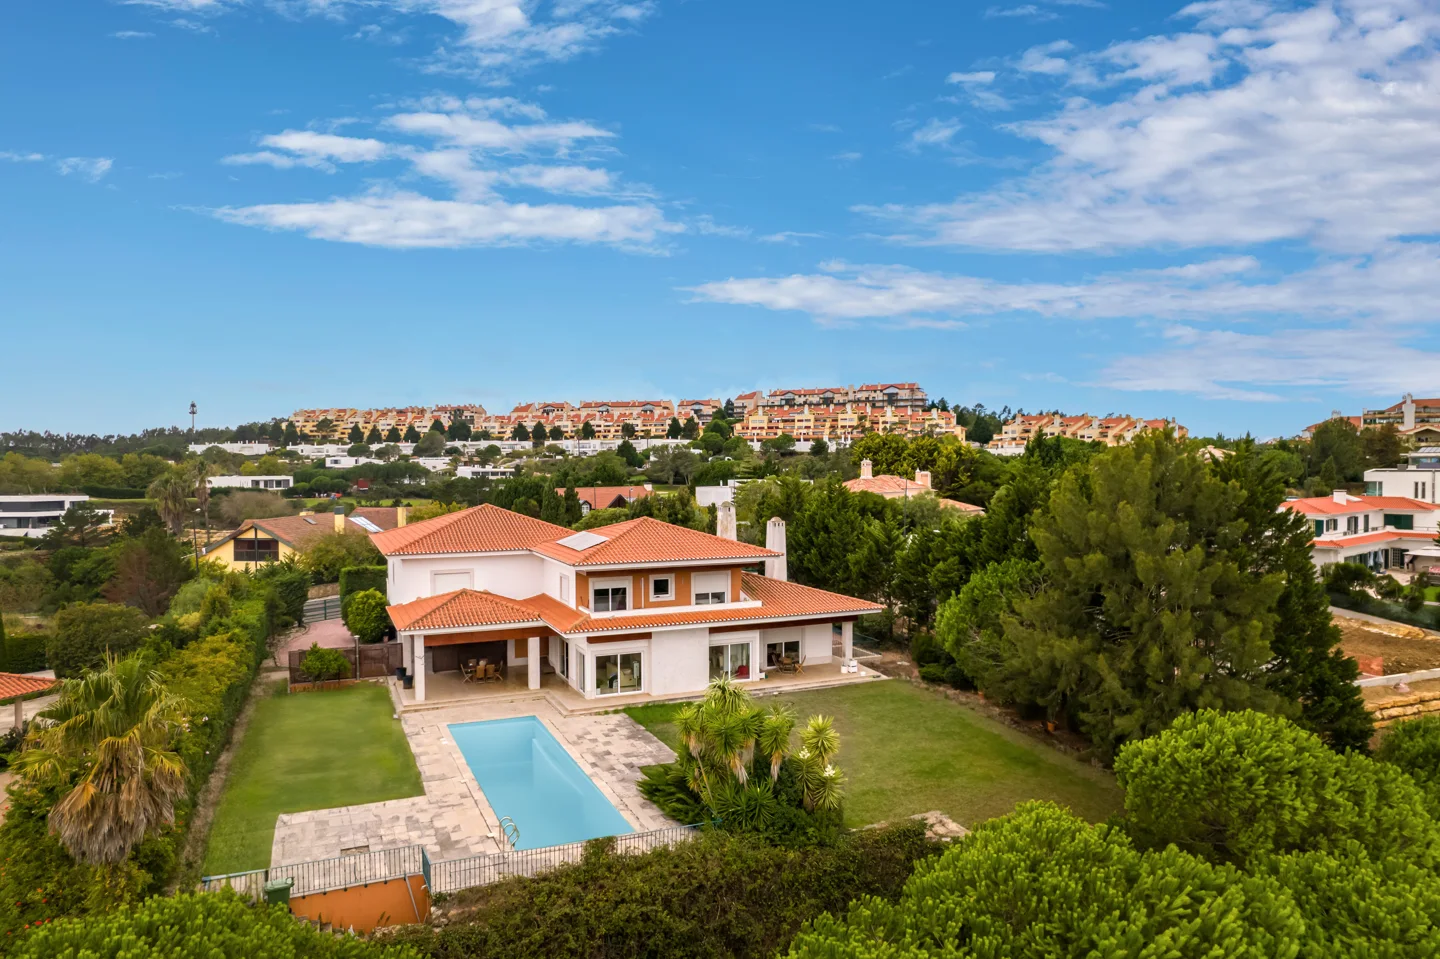 Classic 6 Bedroom Luxury Home with pool, in Belas Clube de Campo